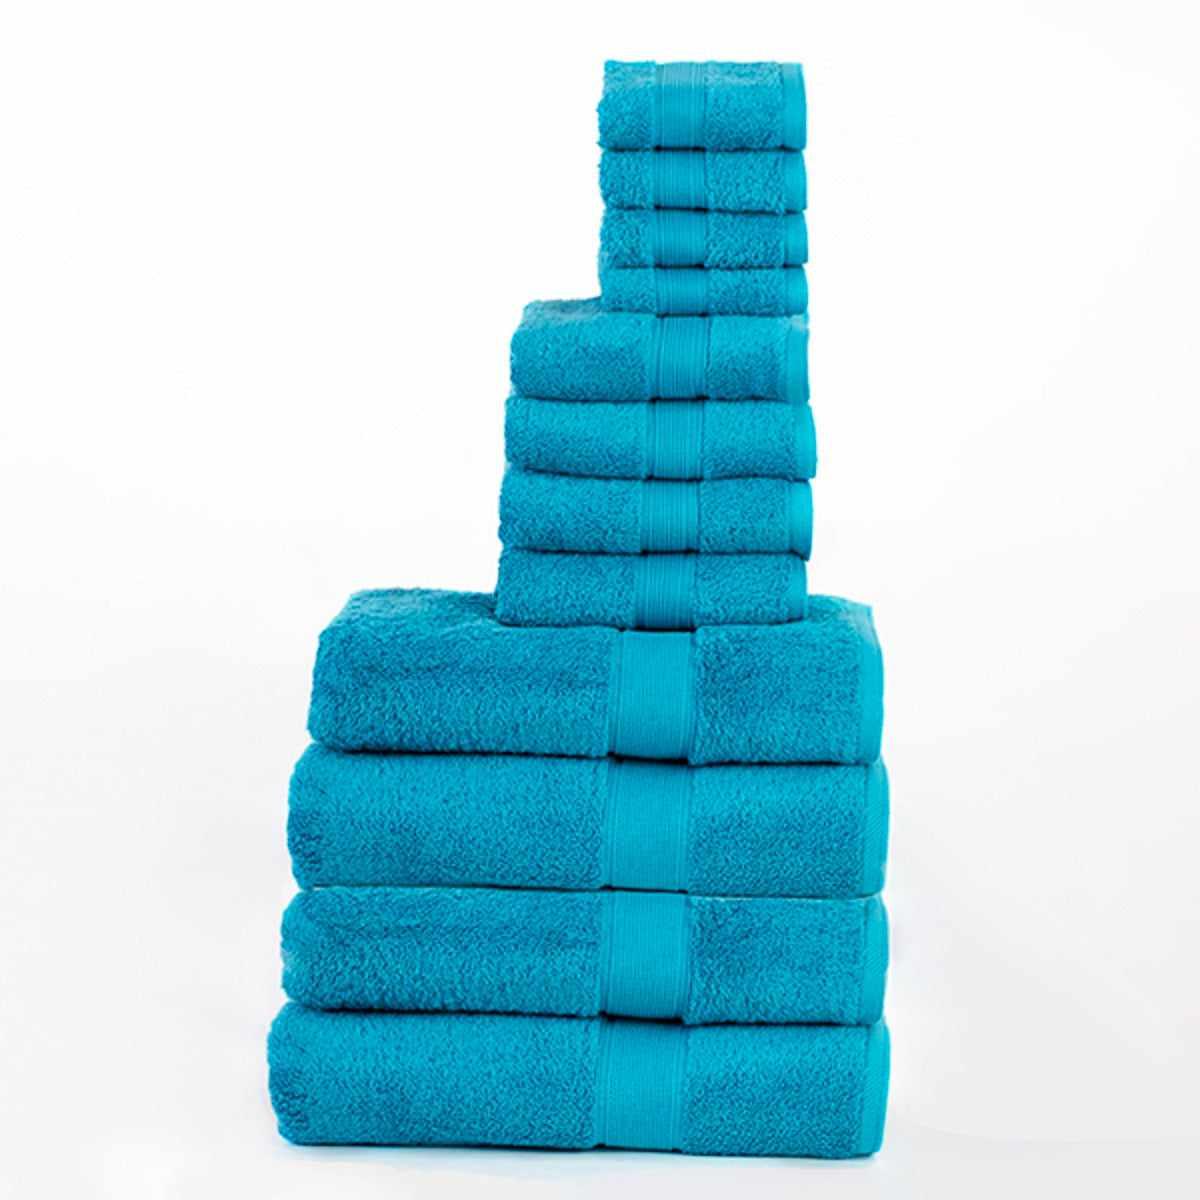  Organic Cotton Plush Solid Assorted 12 Piece Towel Set - Turquoise